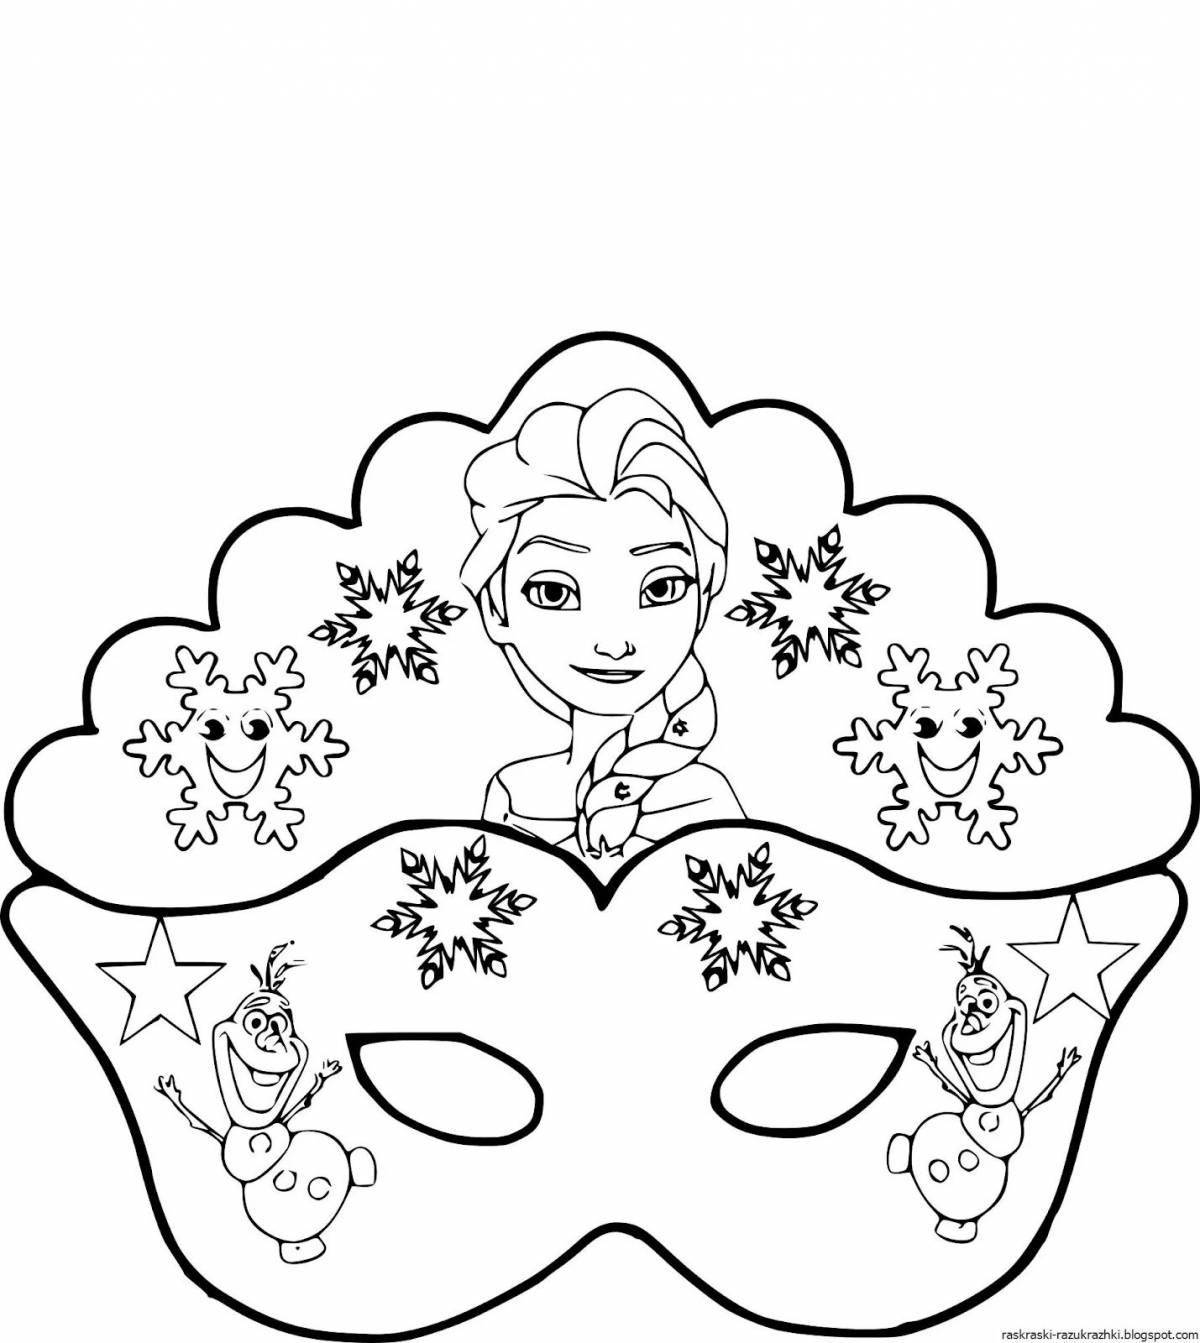 Cute fabric mask coloring page